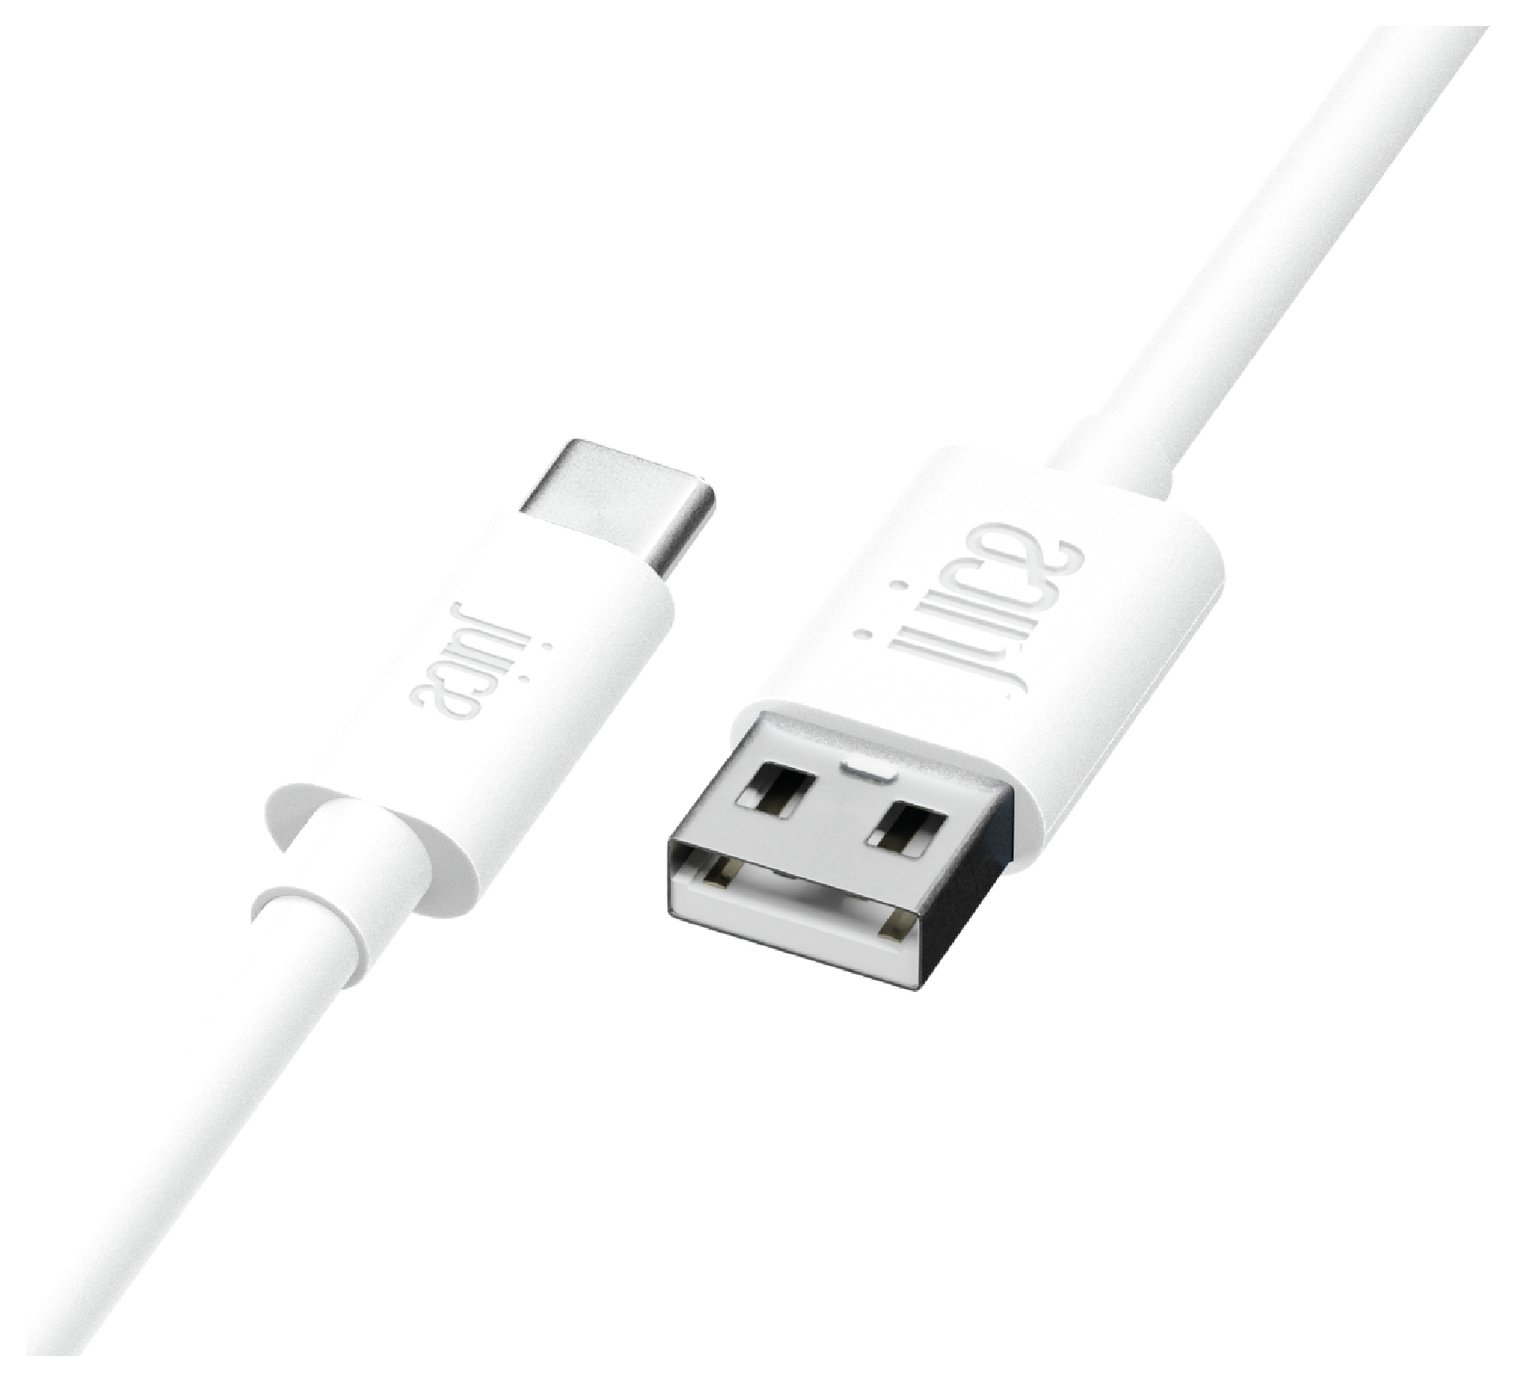 Juice USB A to USB C 3m Charge Cable Review